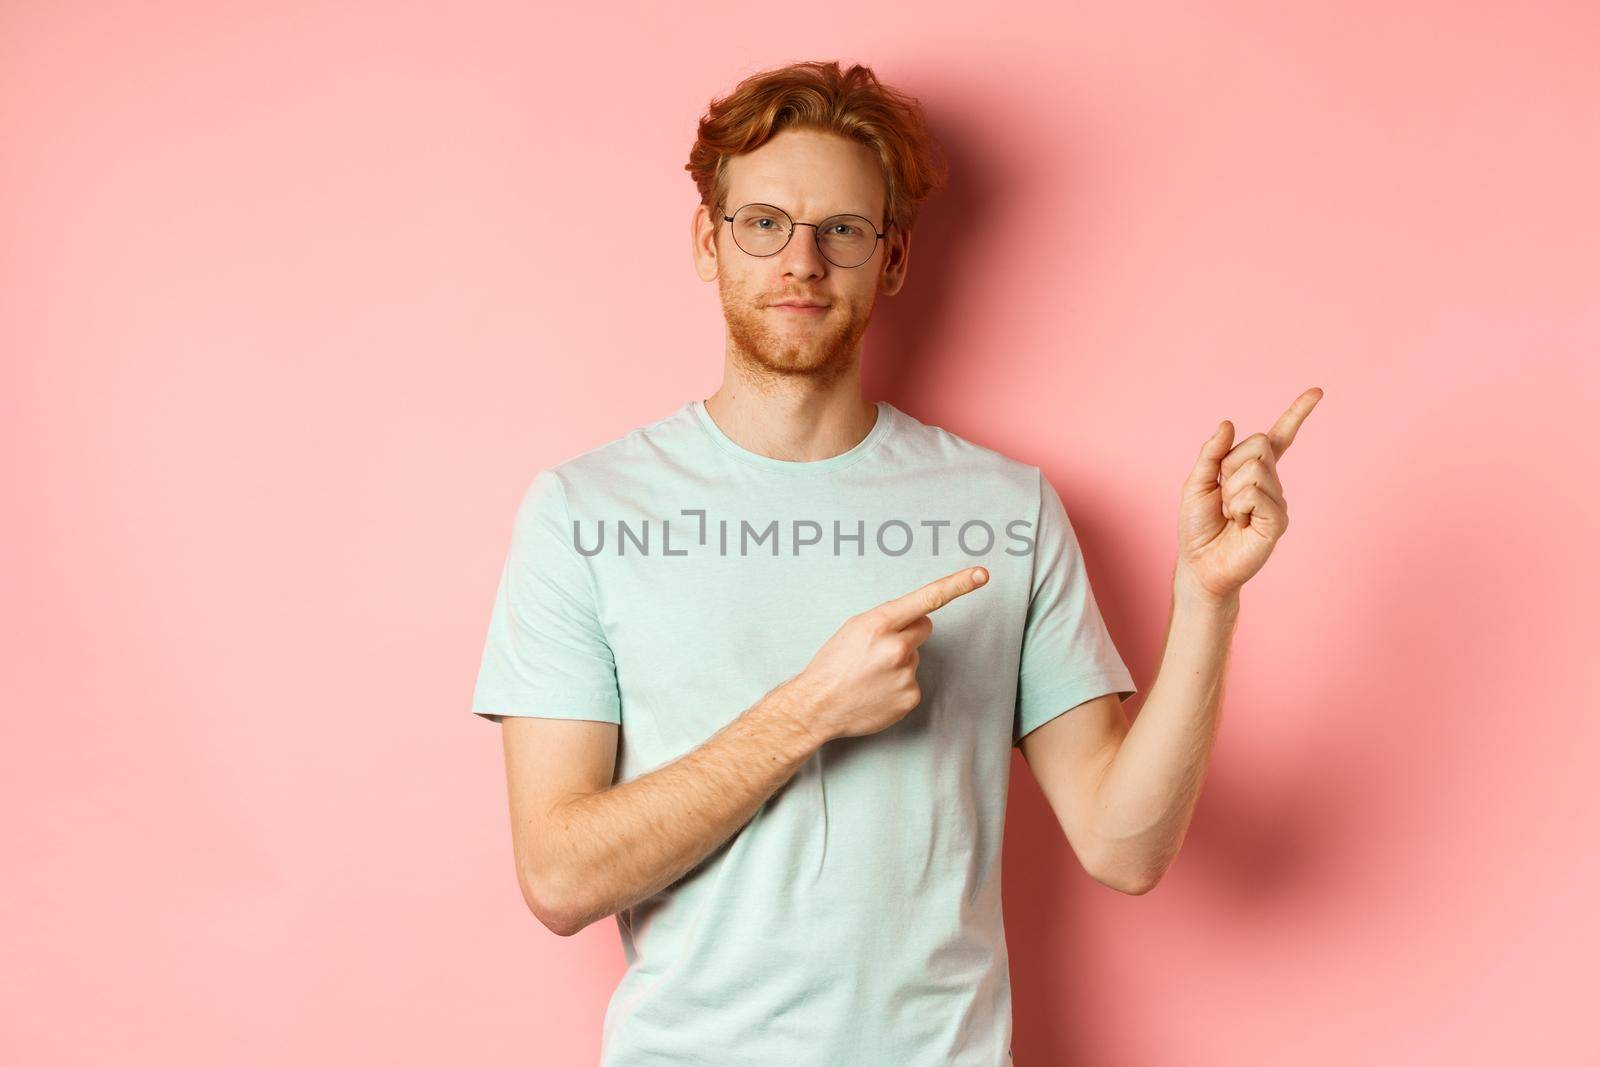 Confident young man with ginger hair and beard, smiling pleased and pointing fingers at upper right corner, invite or demonstrate something, standing over pink background.